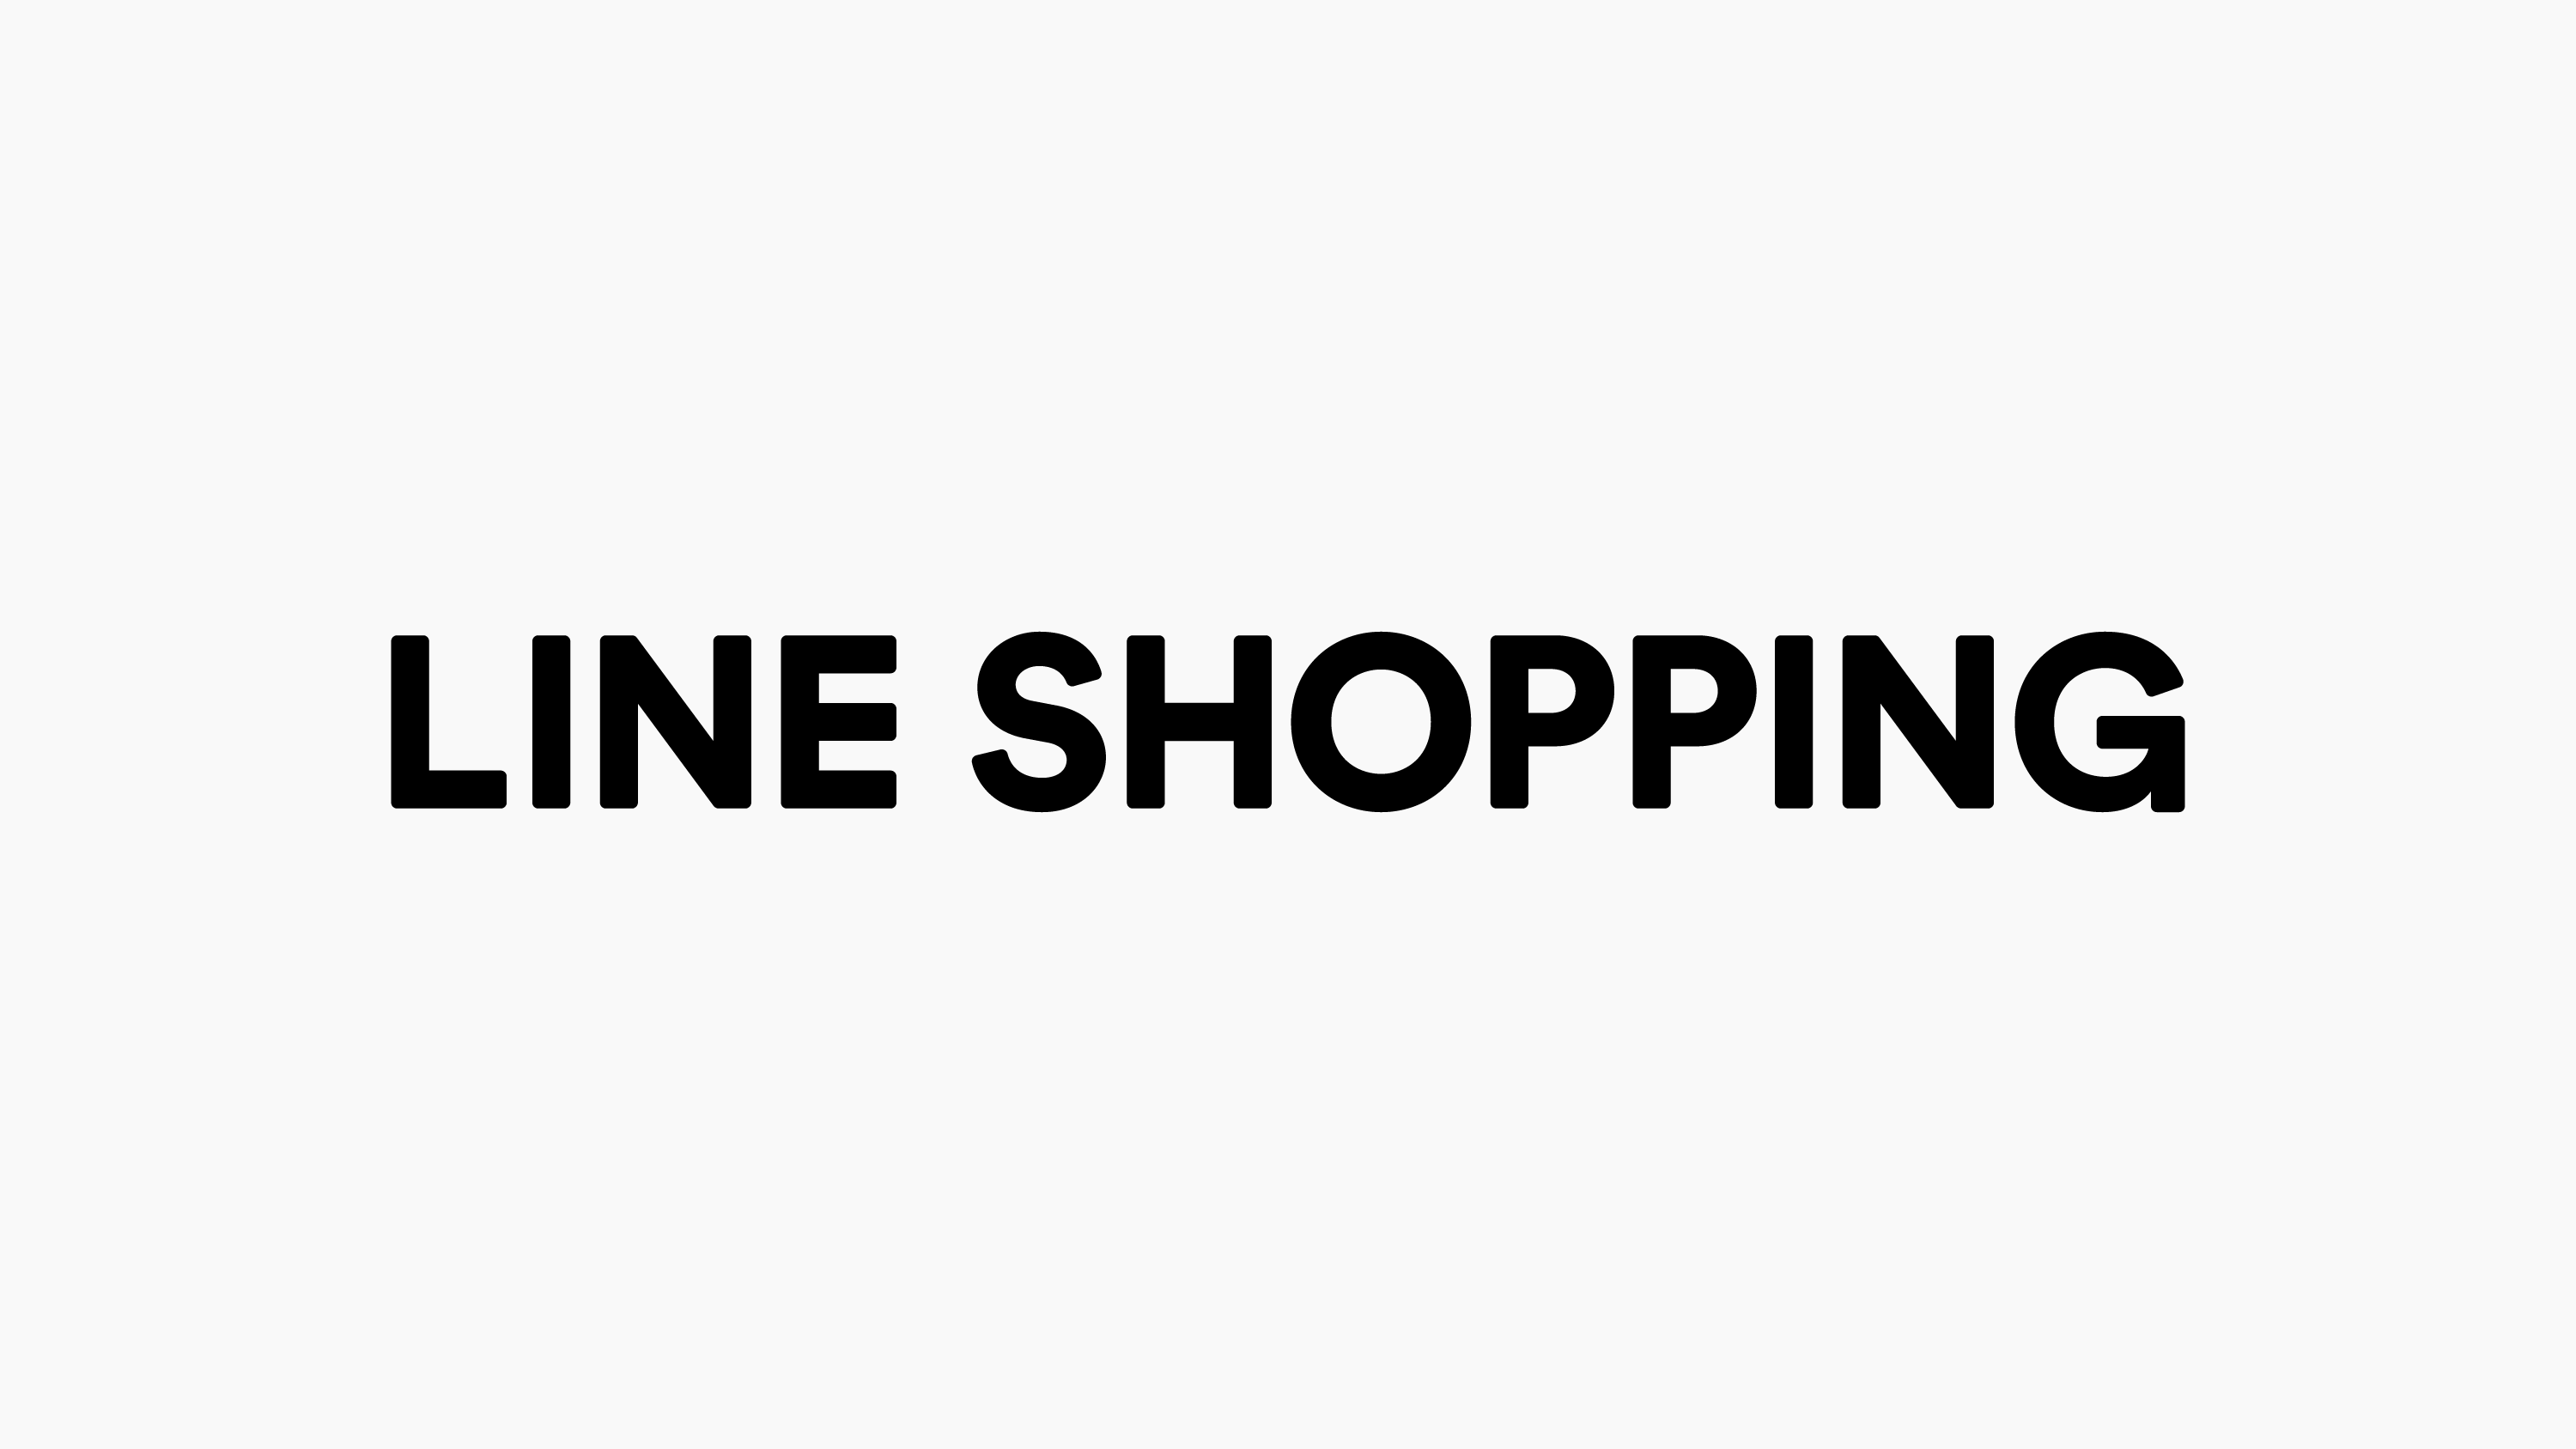 The Home Shopping Logo PNG Transparent & SVG Vector - Freebie Supply